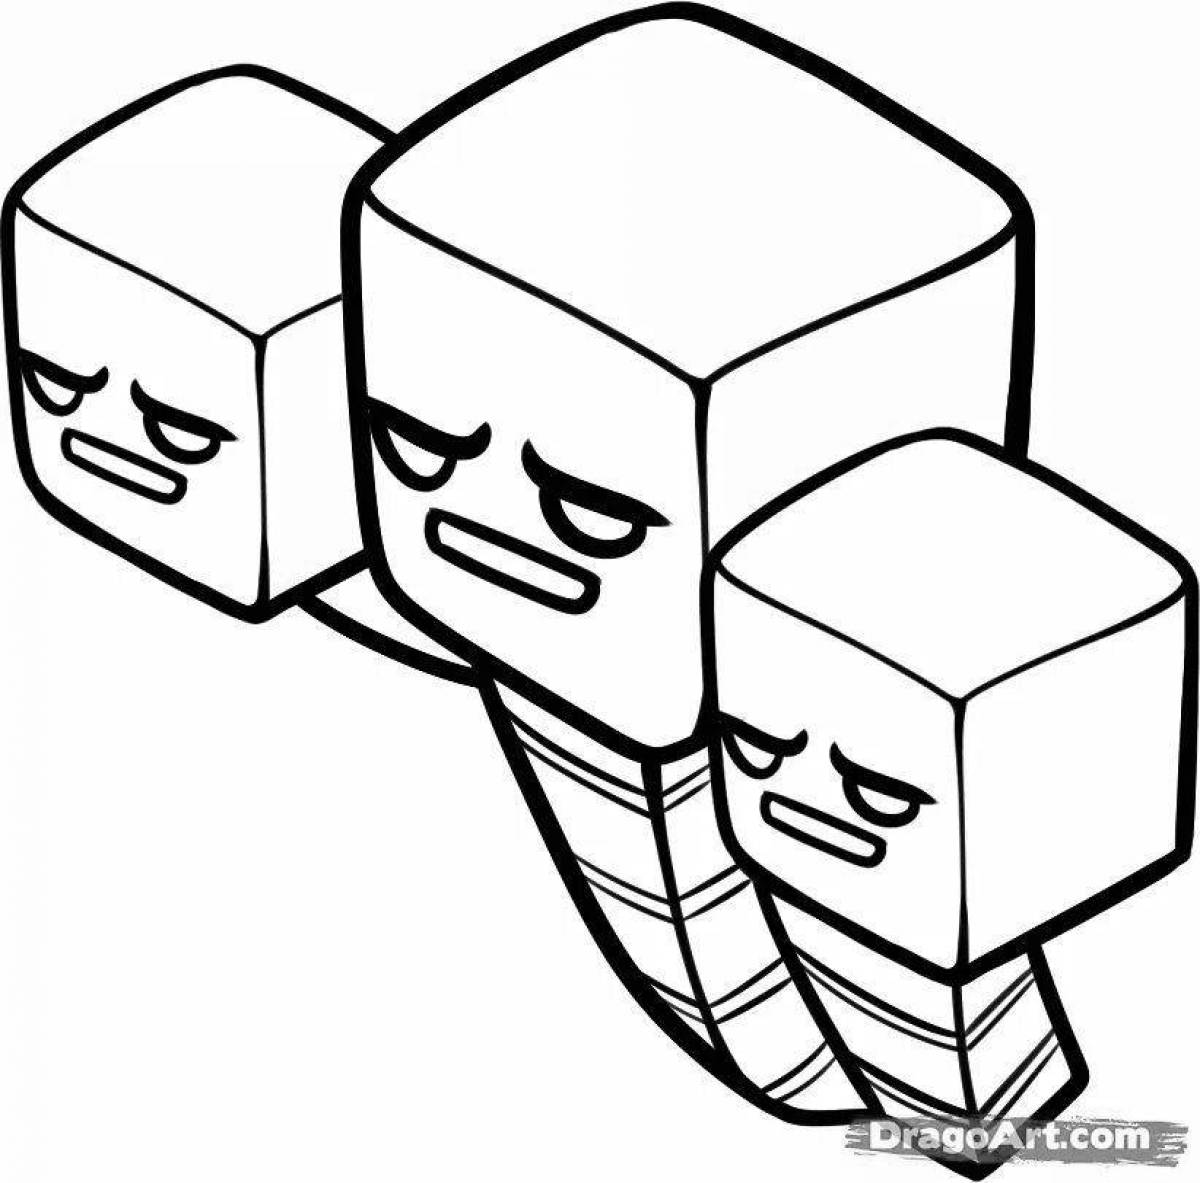 Color-frenzy tumka minecraft coloring page